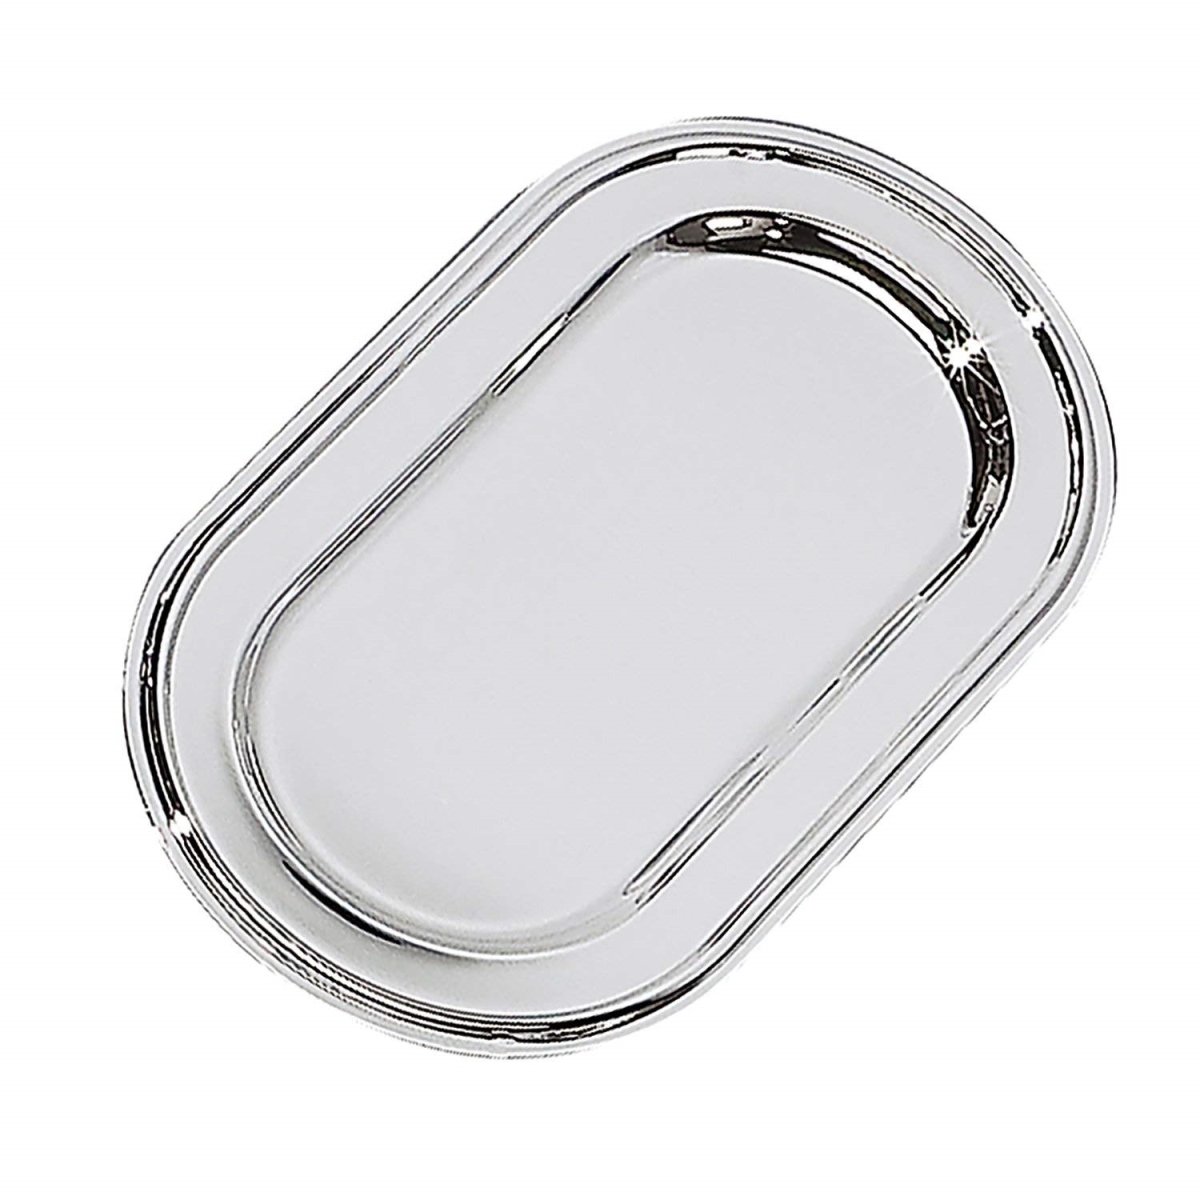 11 X 6 In. Silver Oval Tray